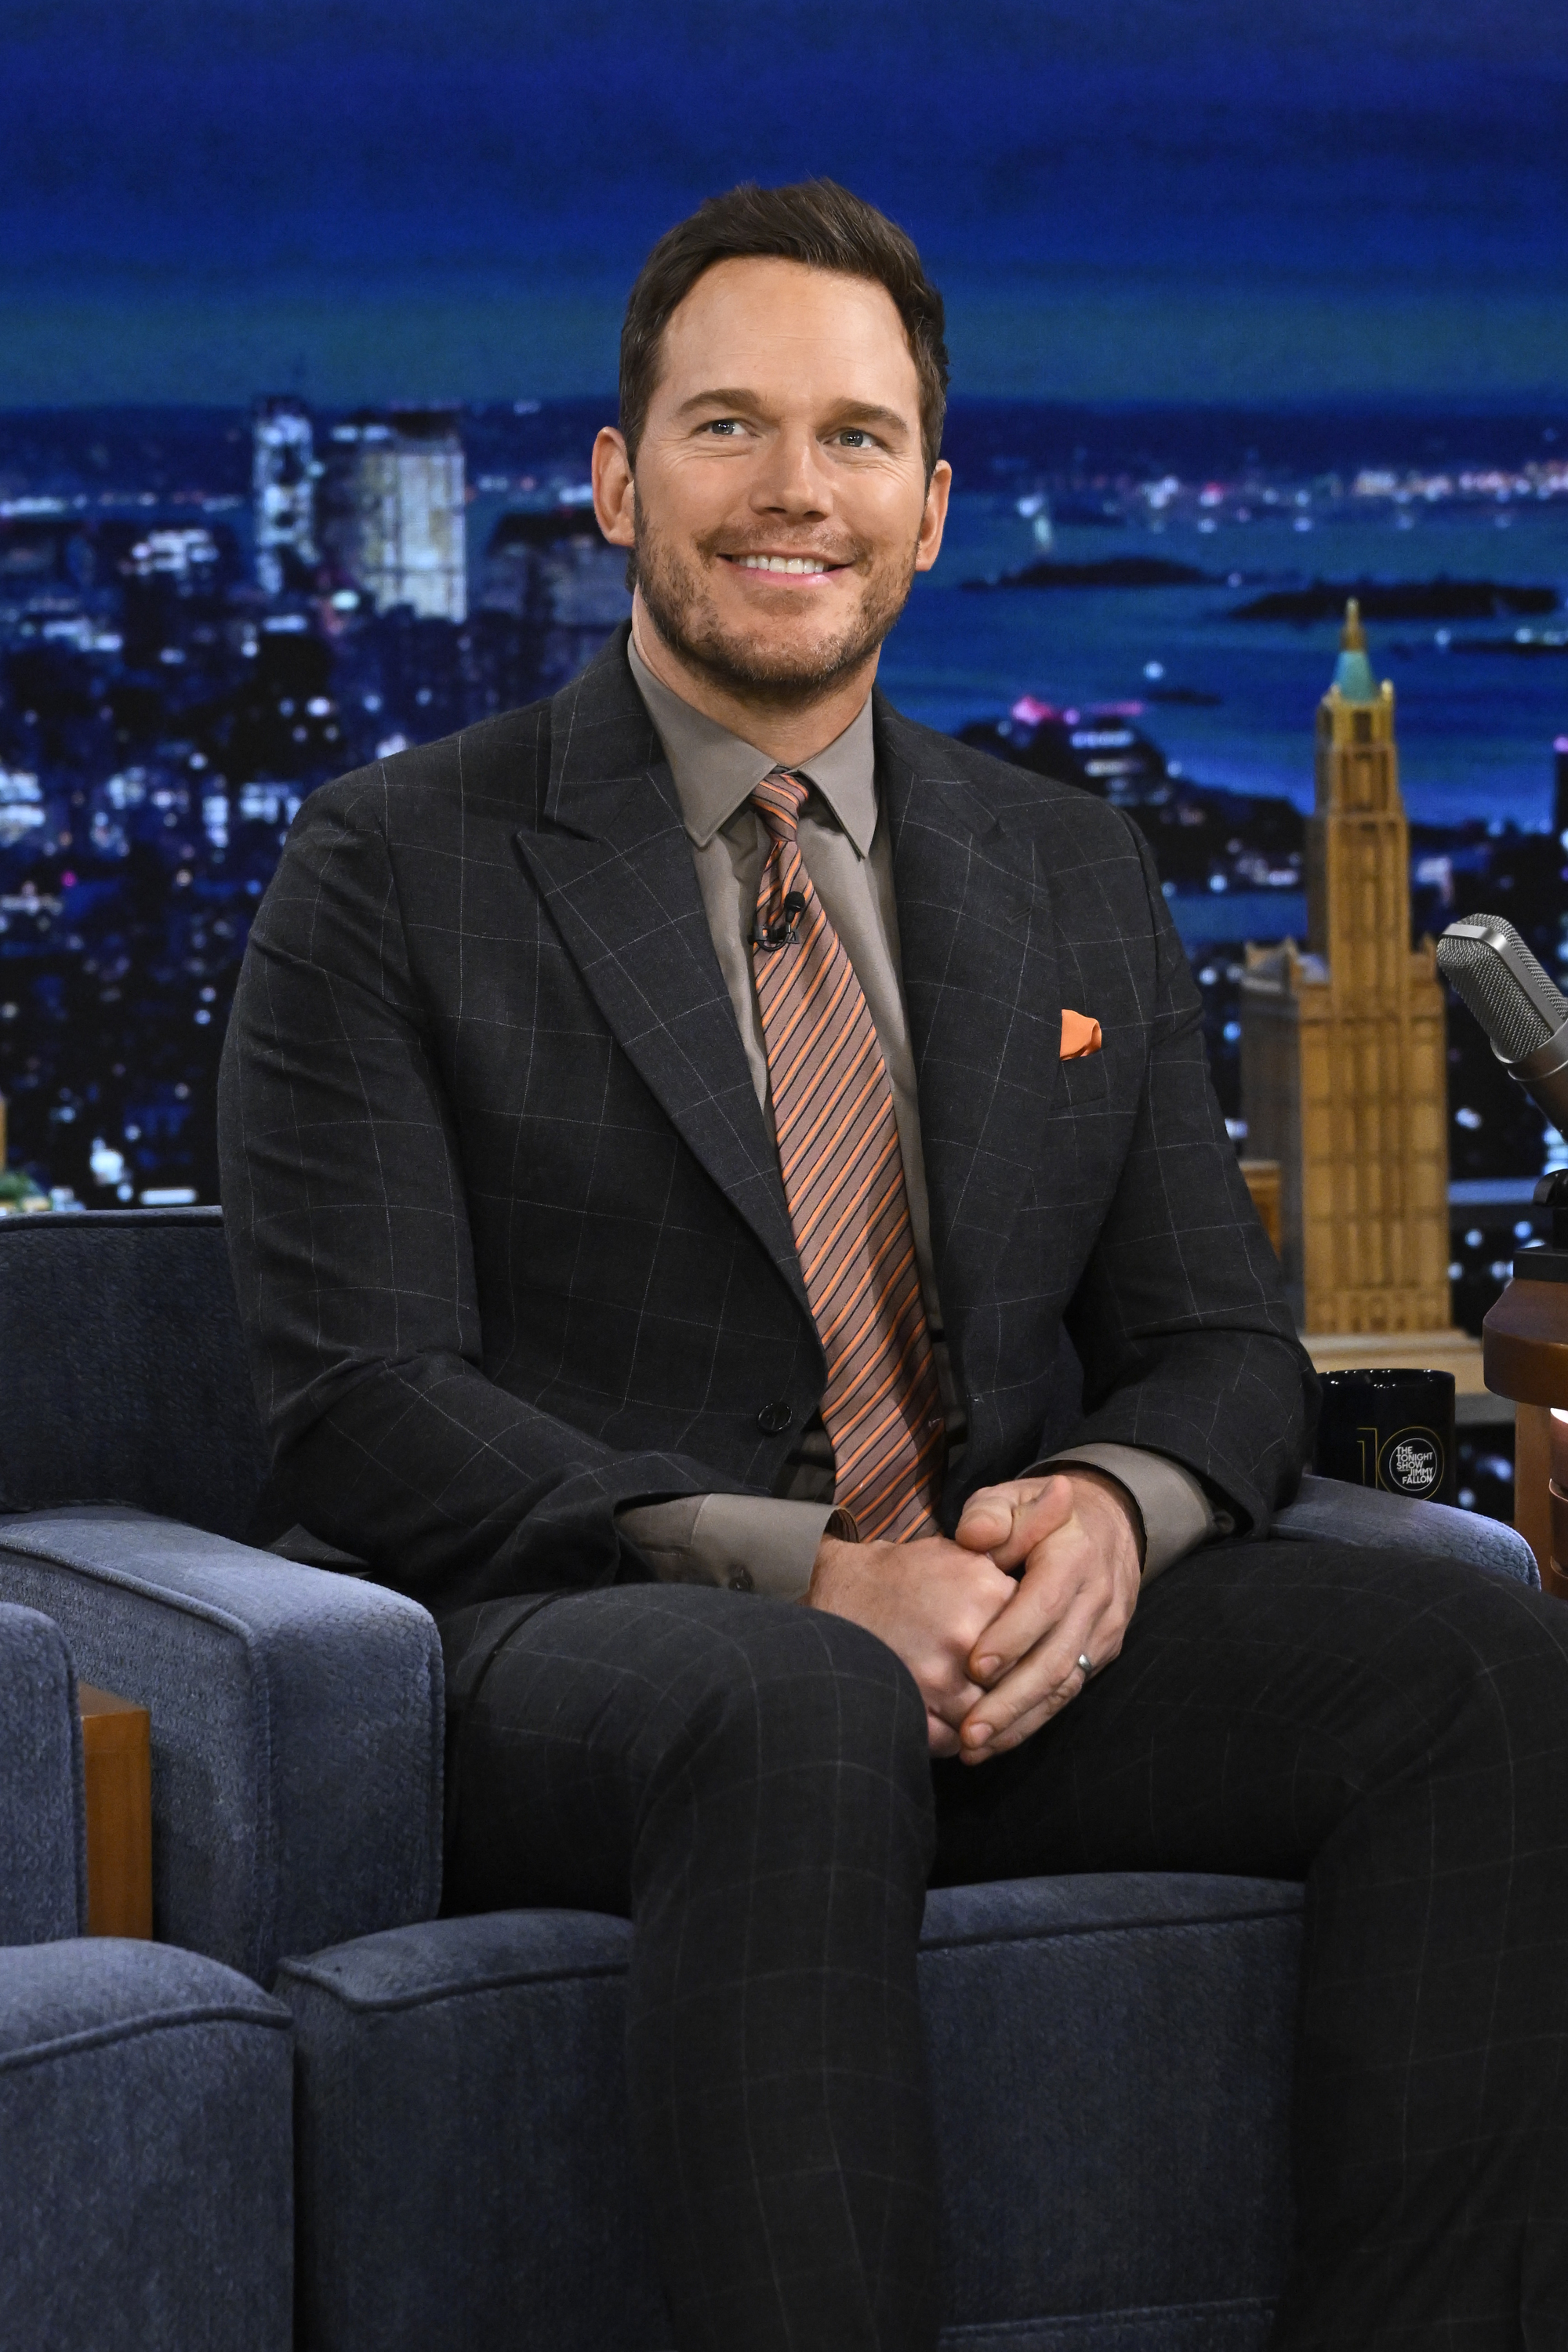 Actor Chris Pratt smiles during an interview on The Tonight Show Starring Jimmy Fallon on May 23